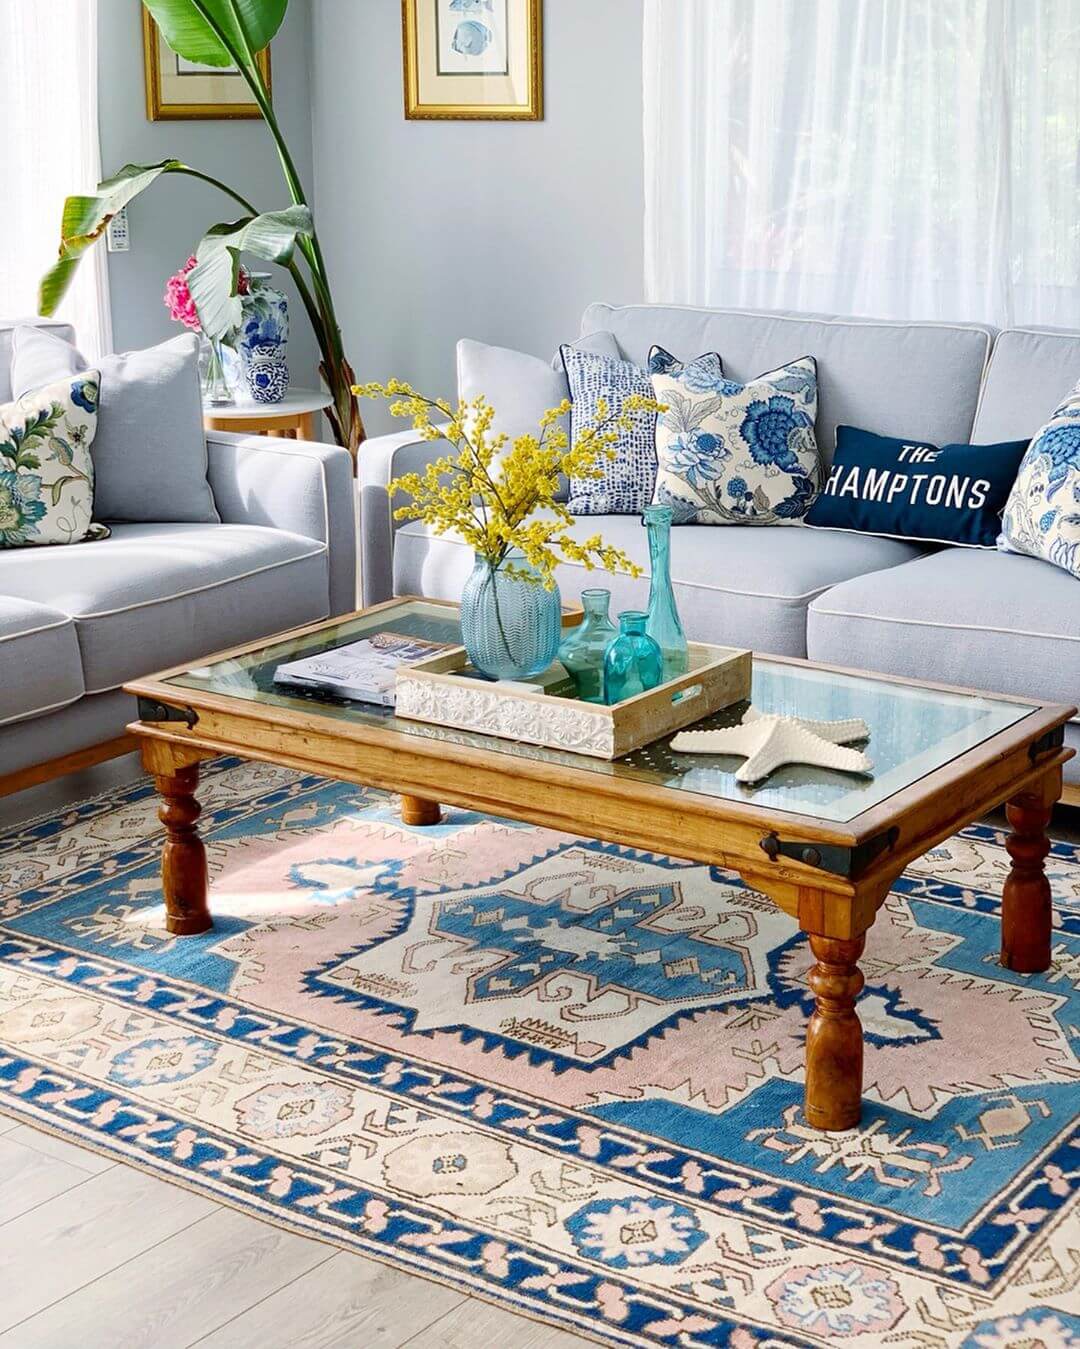 21 Amazing Living Room Rug Ideas to Make the Room Livelier ...